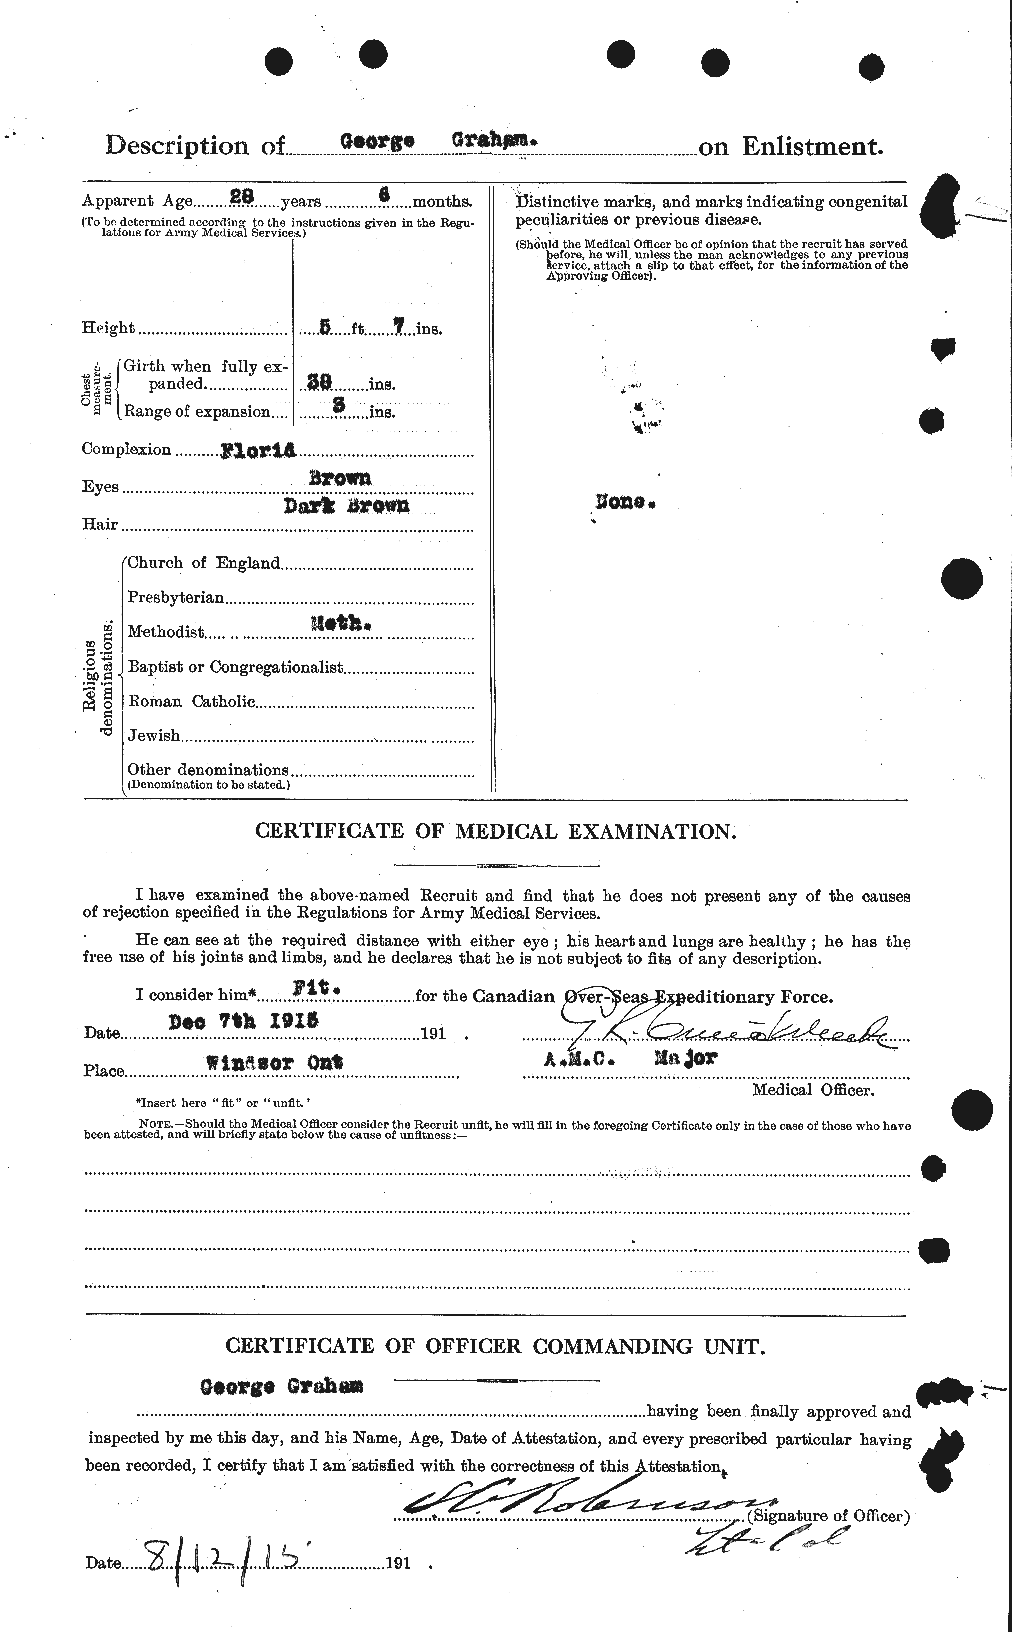 Personnel Records of the First World War - CEF 357627b